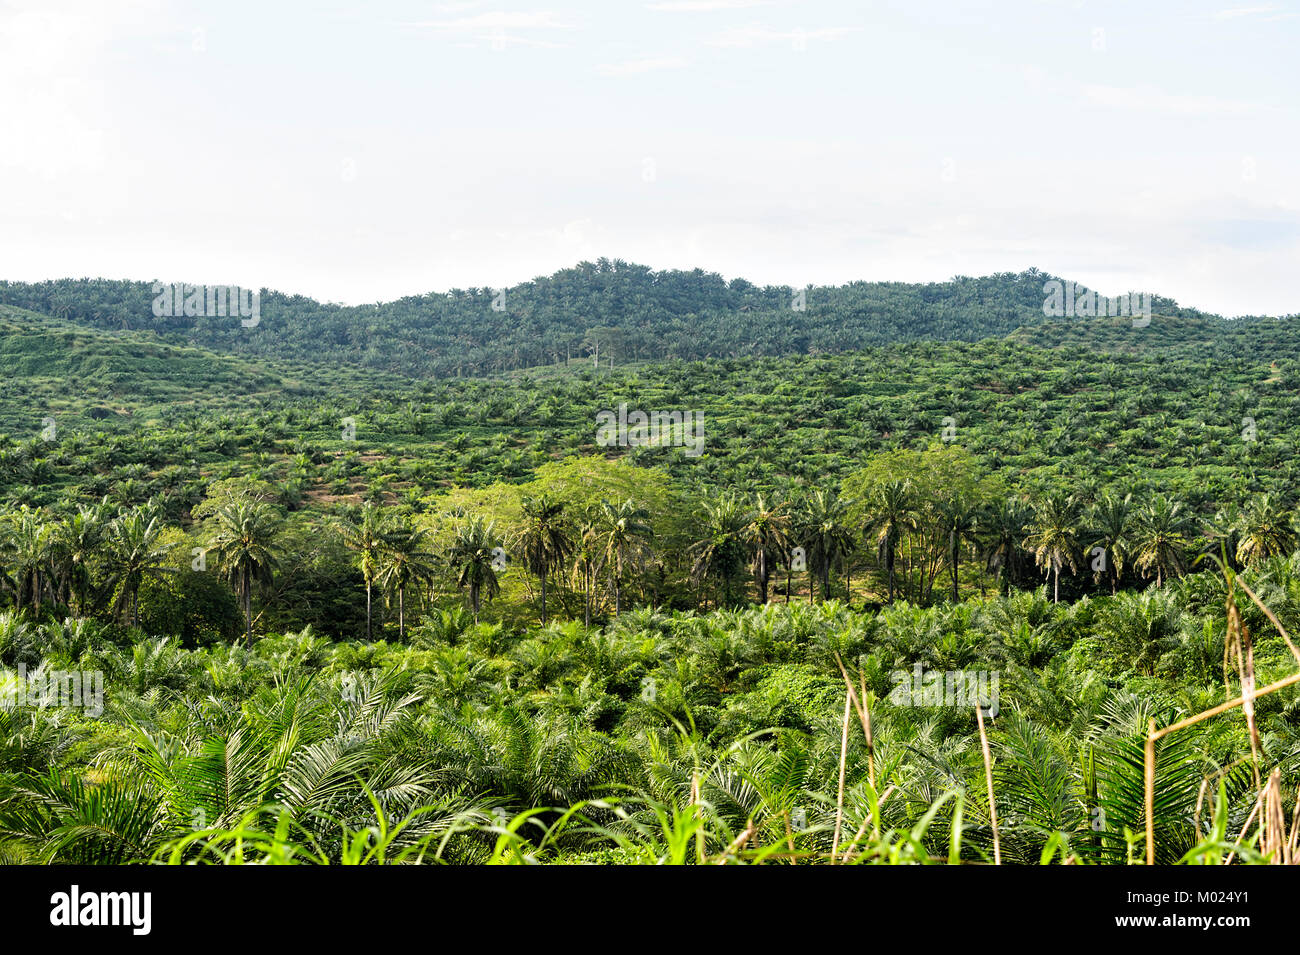 Young palm oil plantation in a deforested area, Tabin, Borneo, Sabah, Malaysia Stock Photo